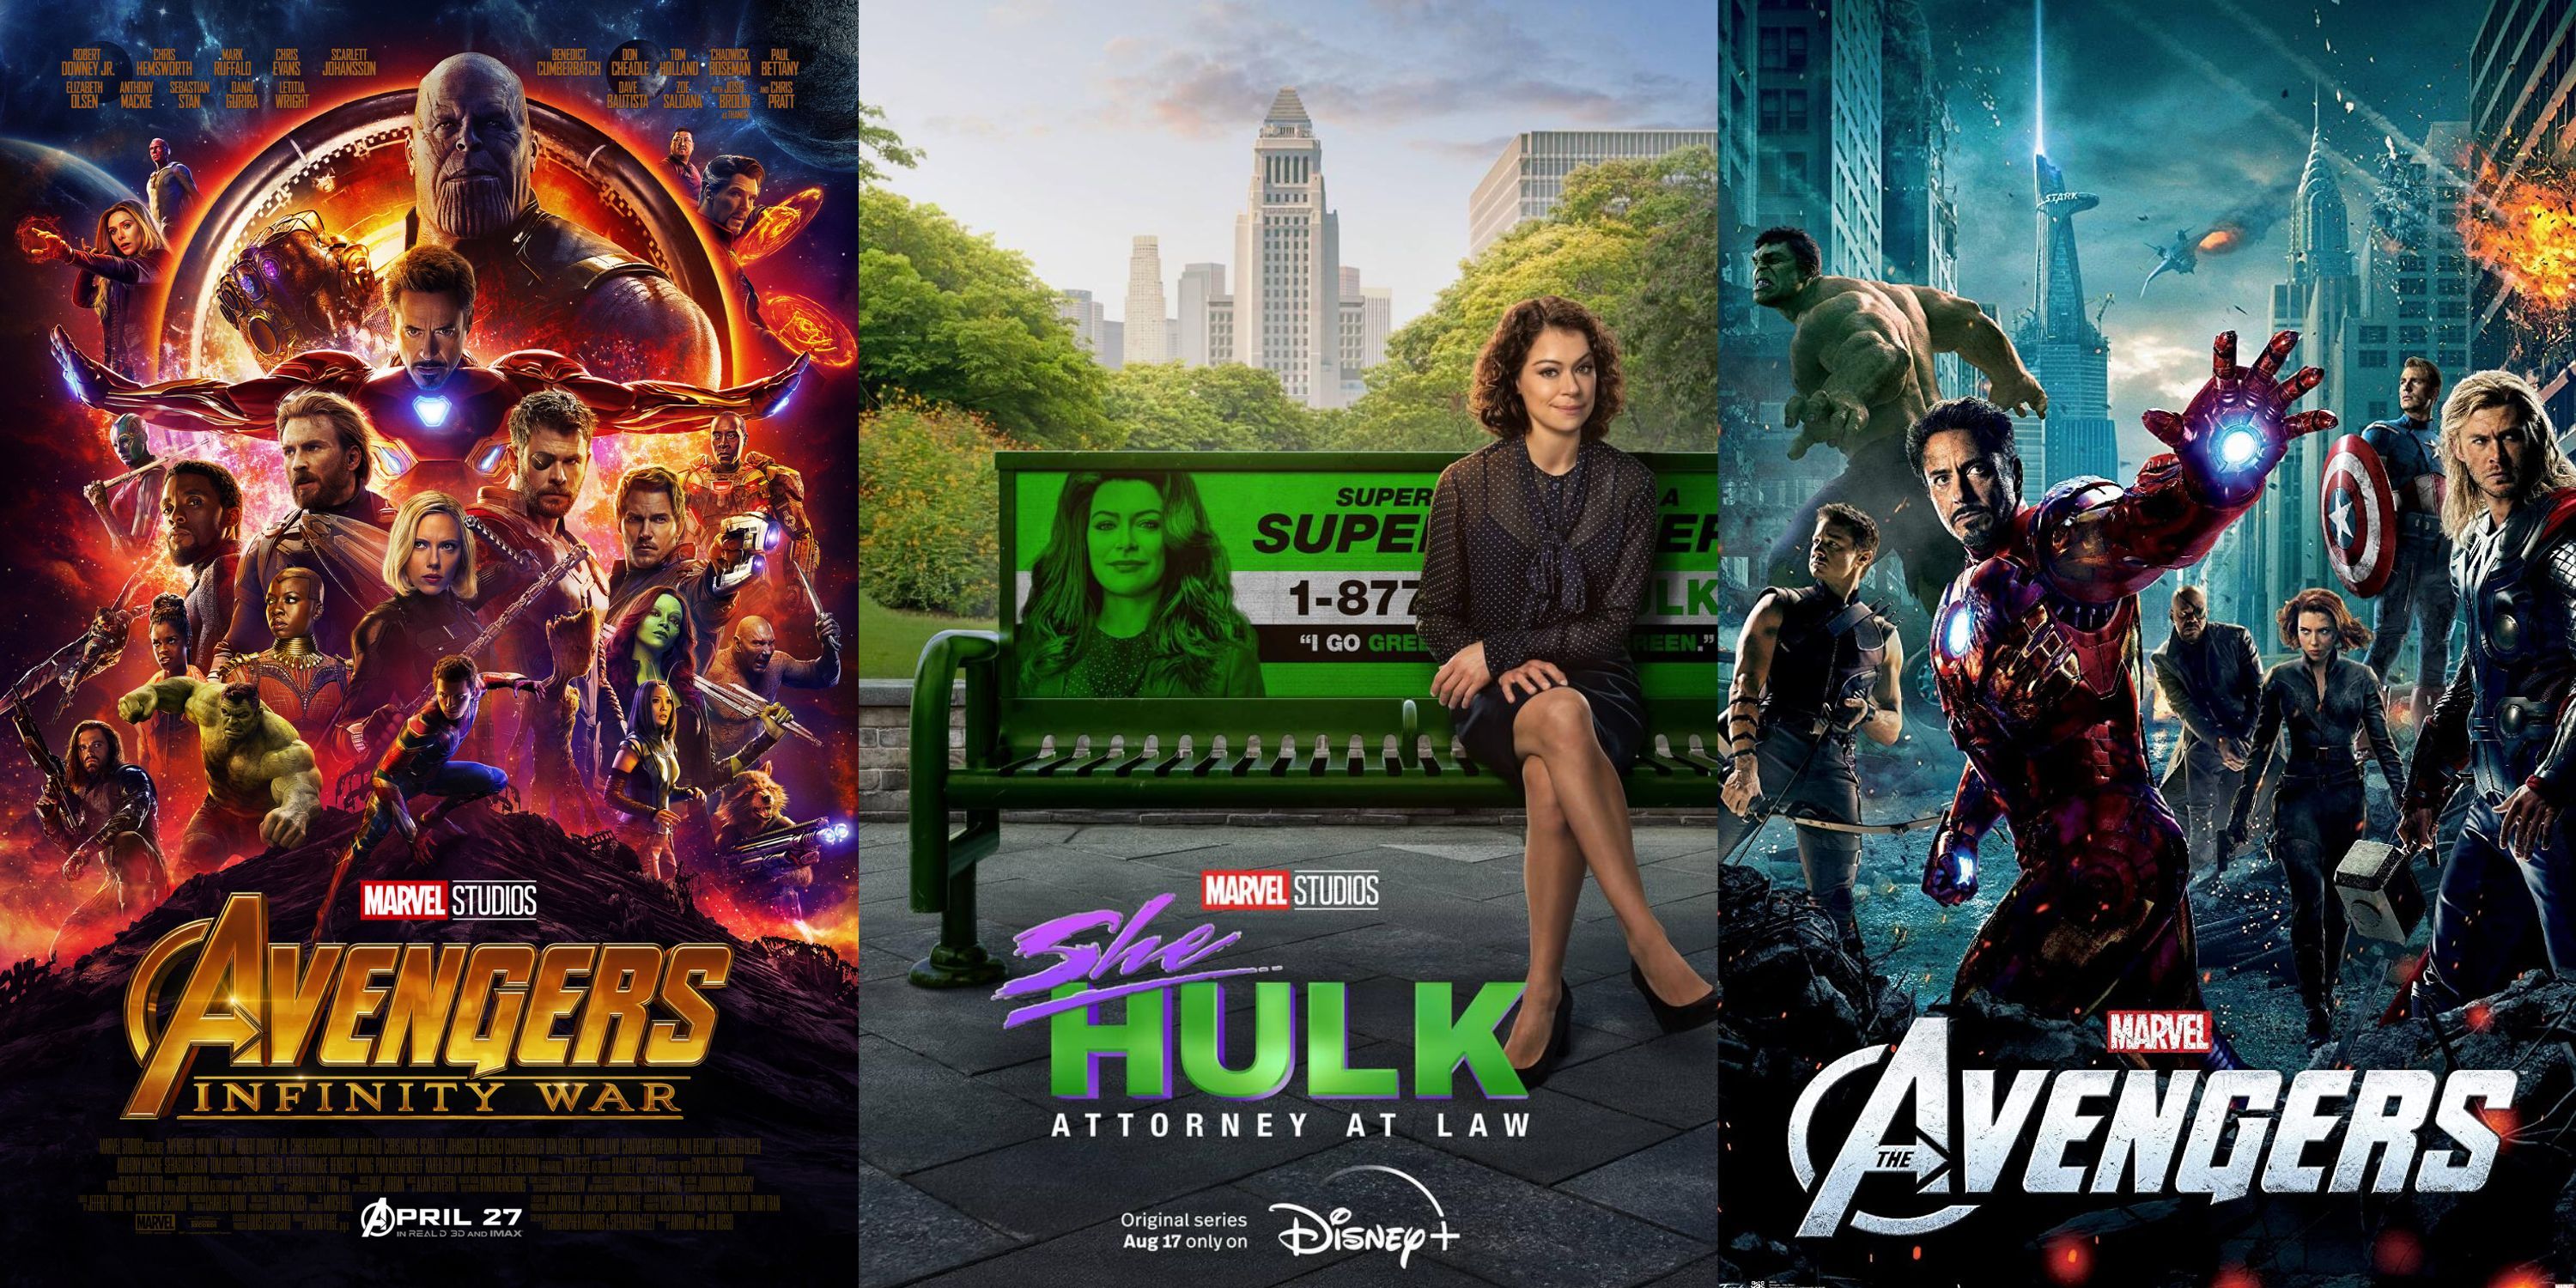 Posters for two Avengers movies and She-Hulk